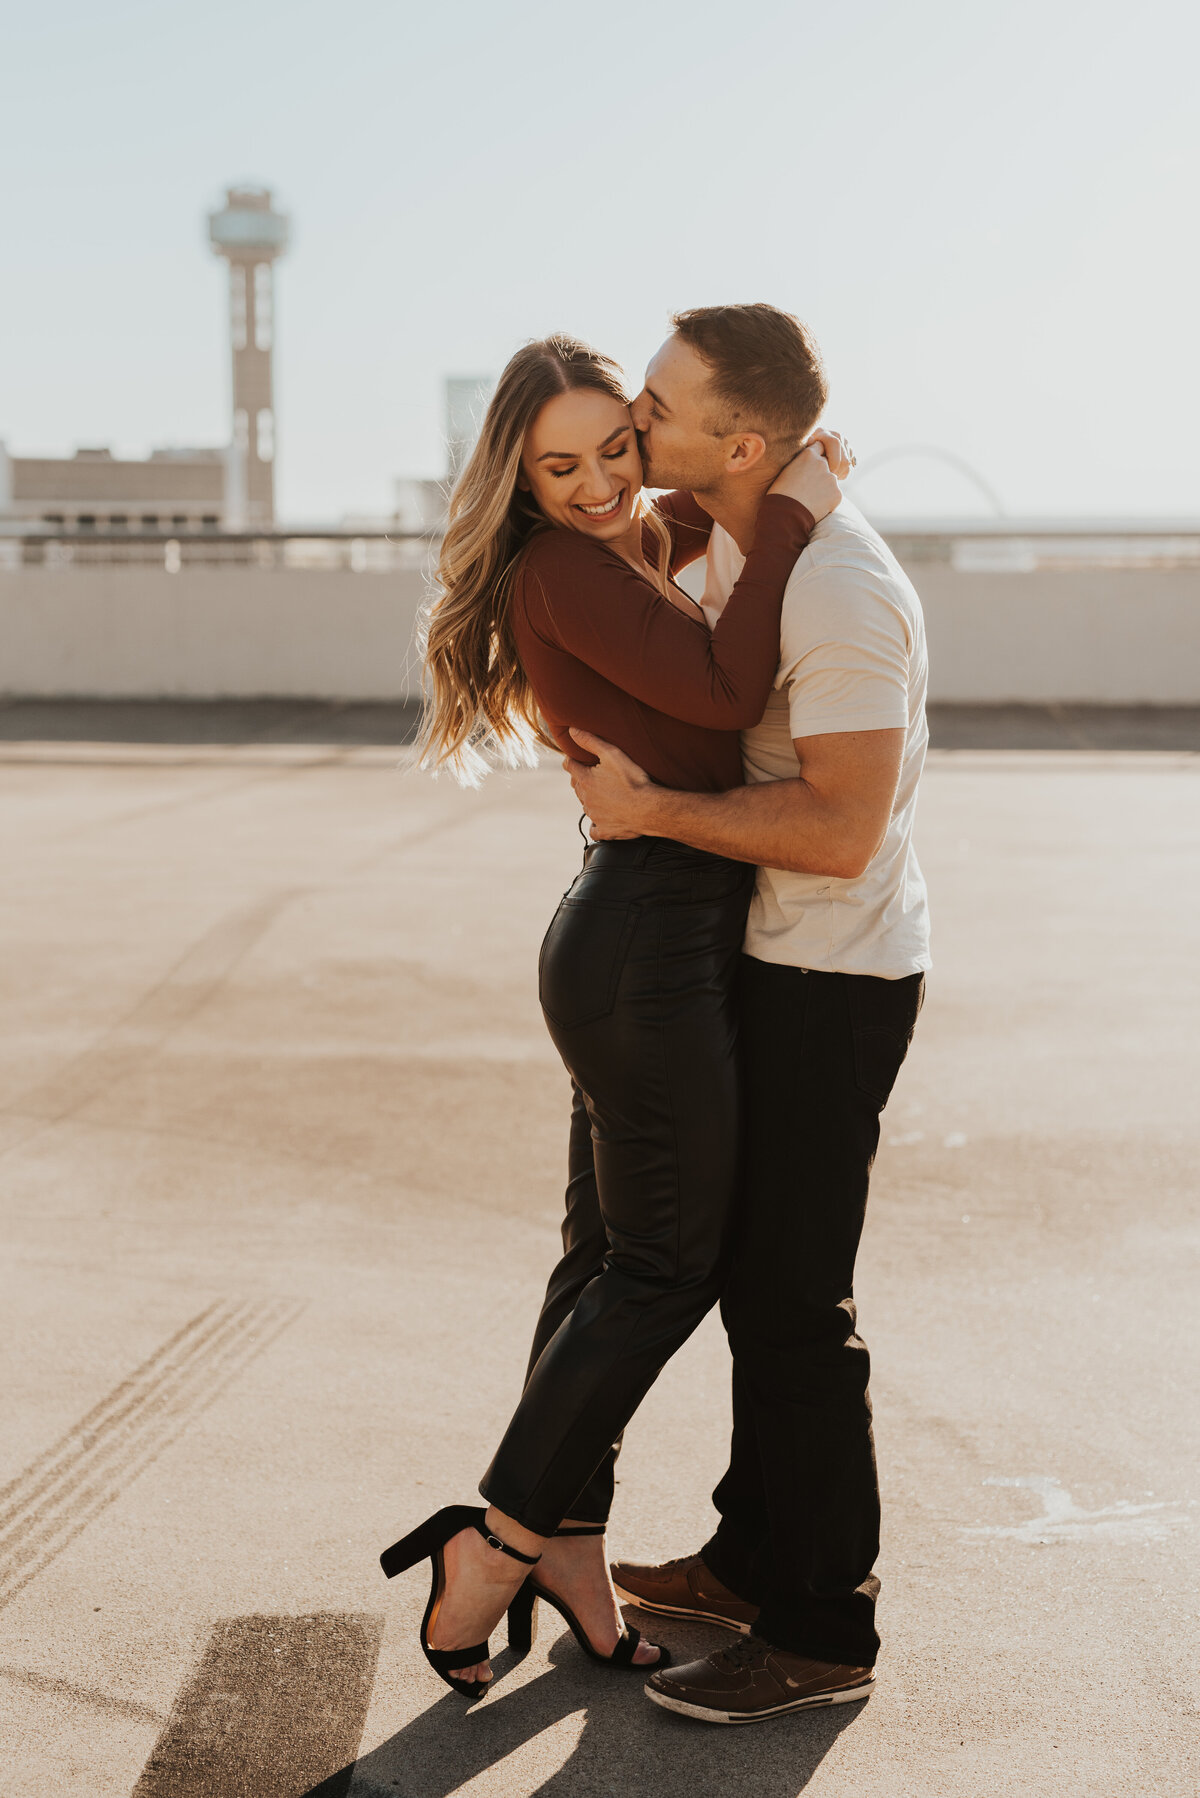 Stephanie-and-trent-engagement-session-at-downtown-dallas-texas-by-bruna-kitchen-photography-13